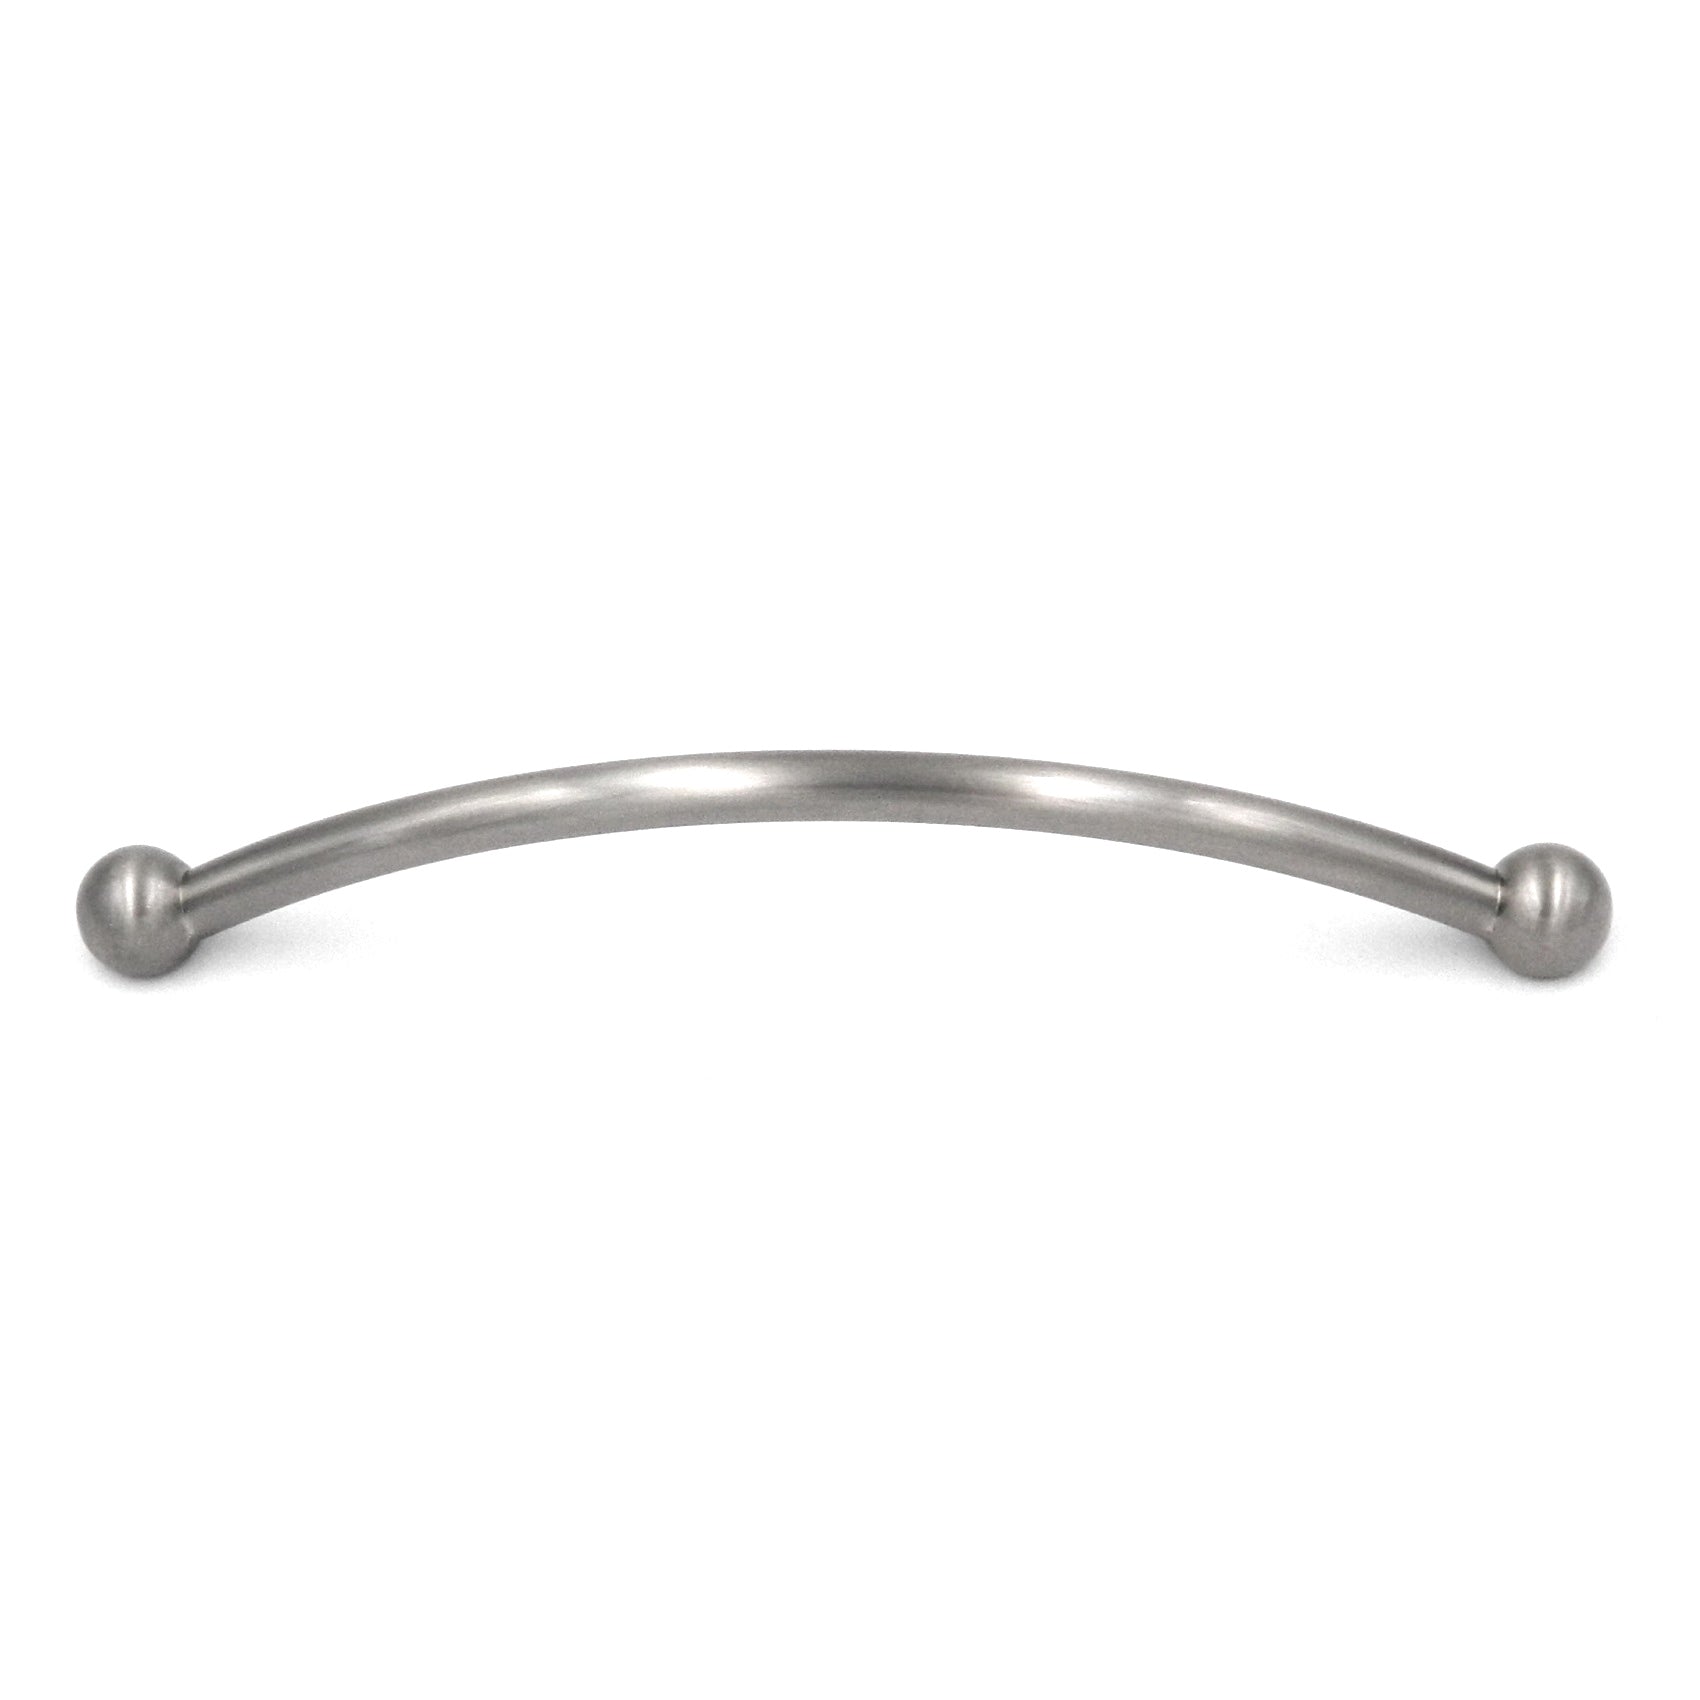 Hickory Metropolis P2924-SN Satin Nickel 5" (128mm)cc Arch Cabinet Handle Pull